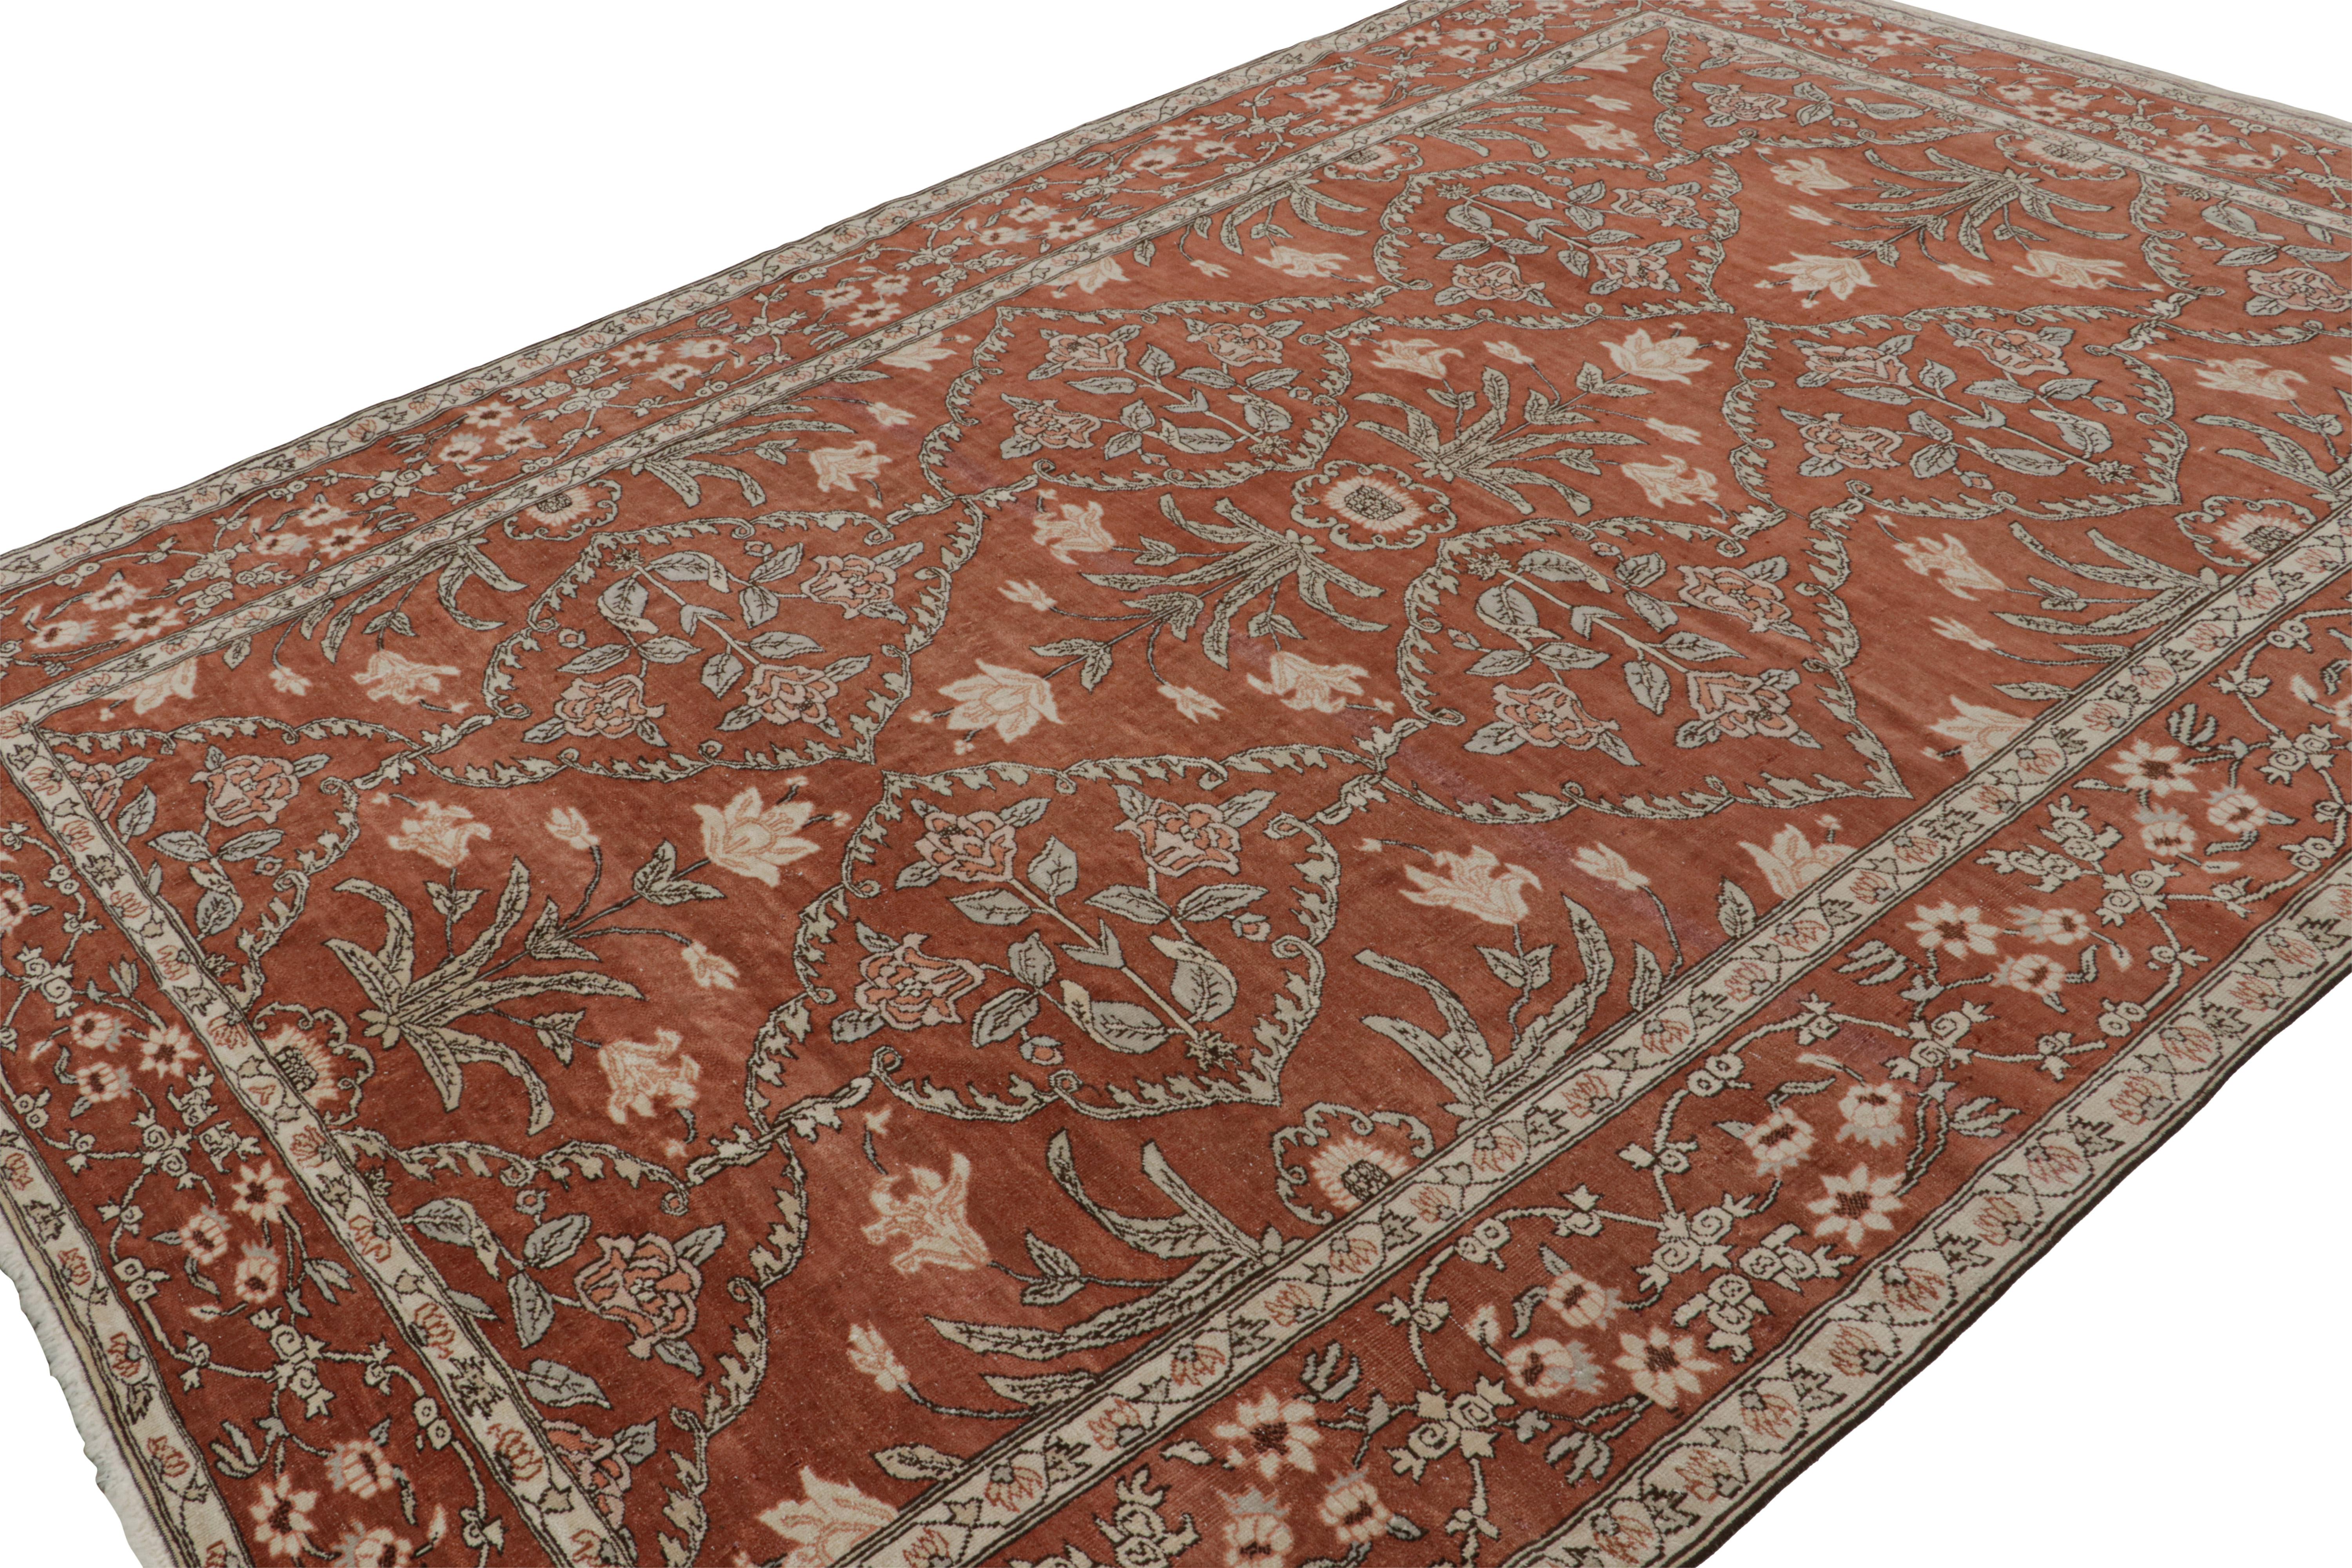 Hand-knotted in wool, this 8x11 17th century Antique Mogul rug has a red field with notes of pink, brick, salmon, or even corral red. This masterpiece sheds light on a design believed to have been made for the court of Emperor Shah Jahan.  

On the